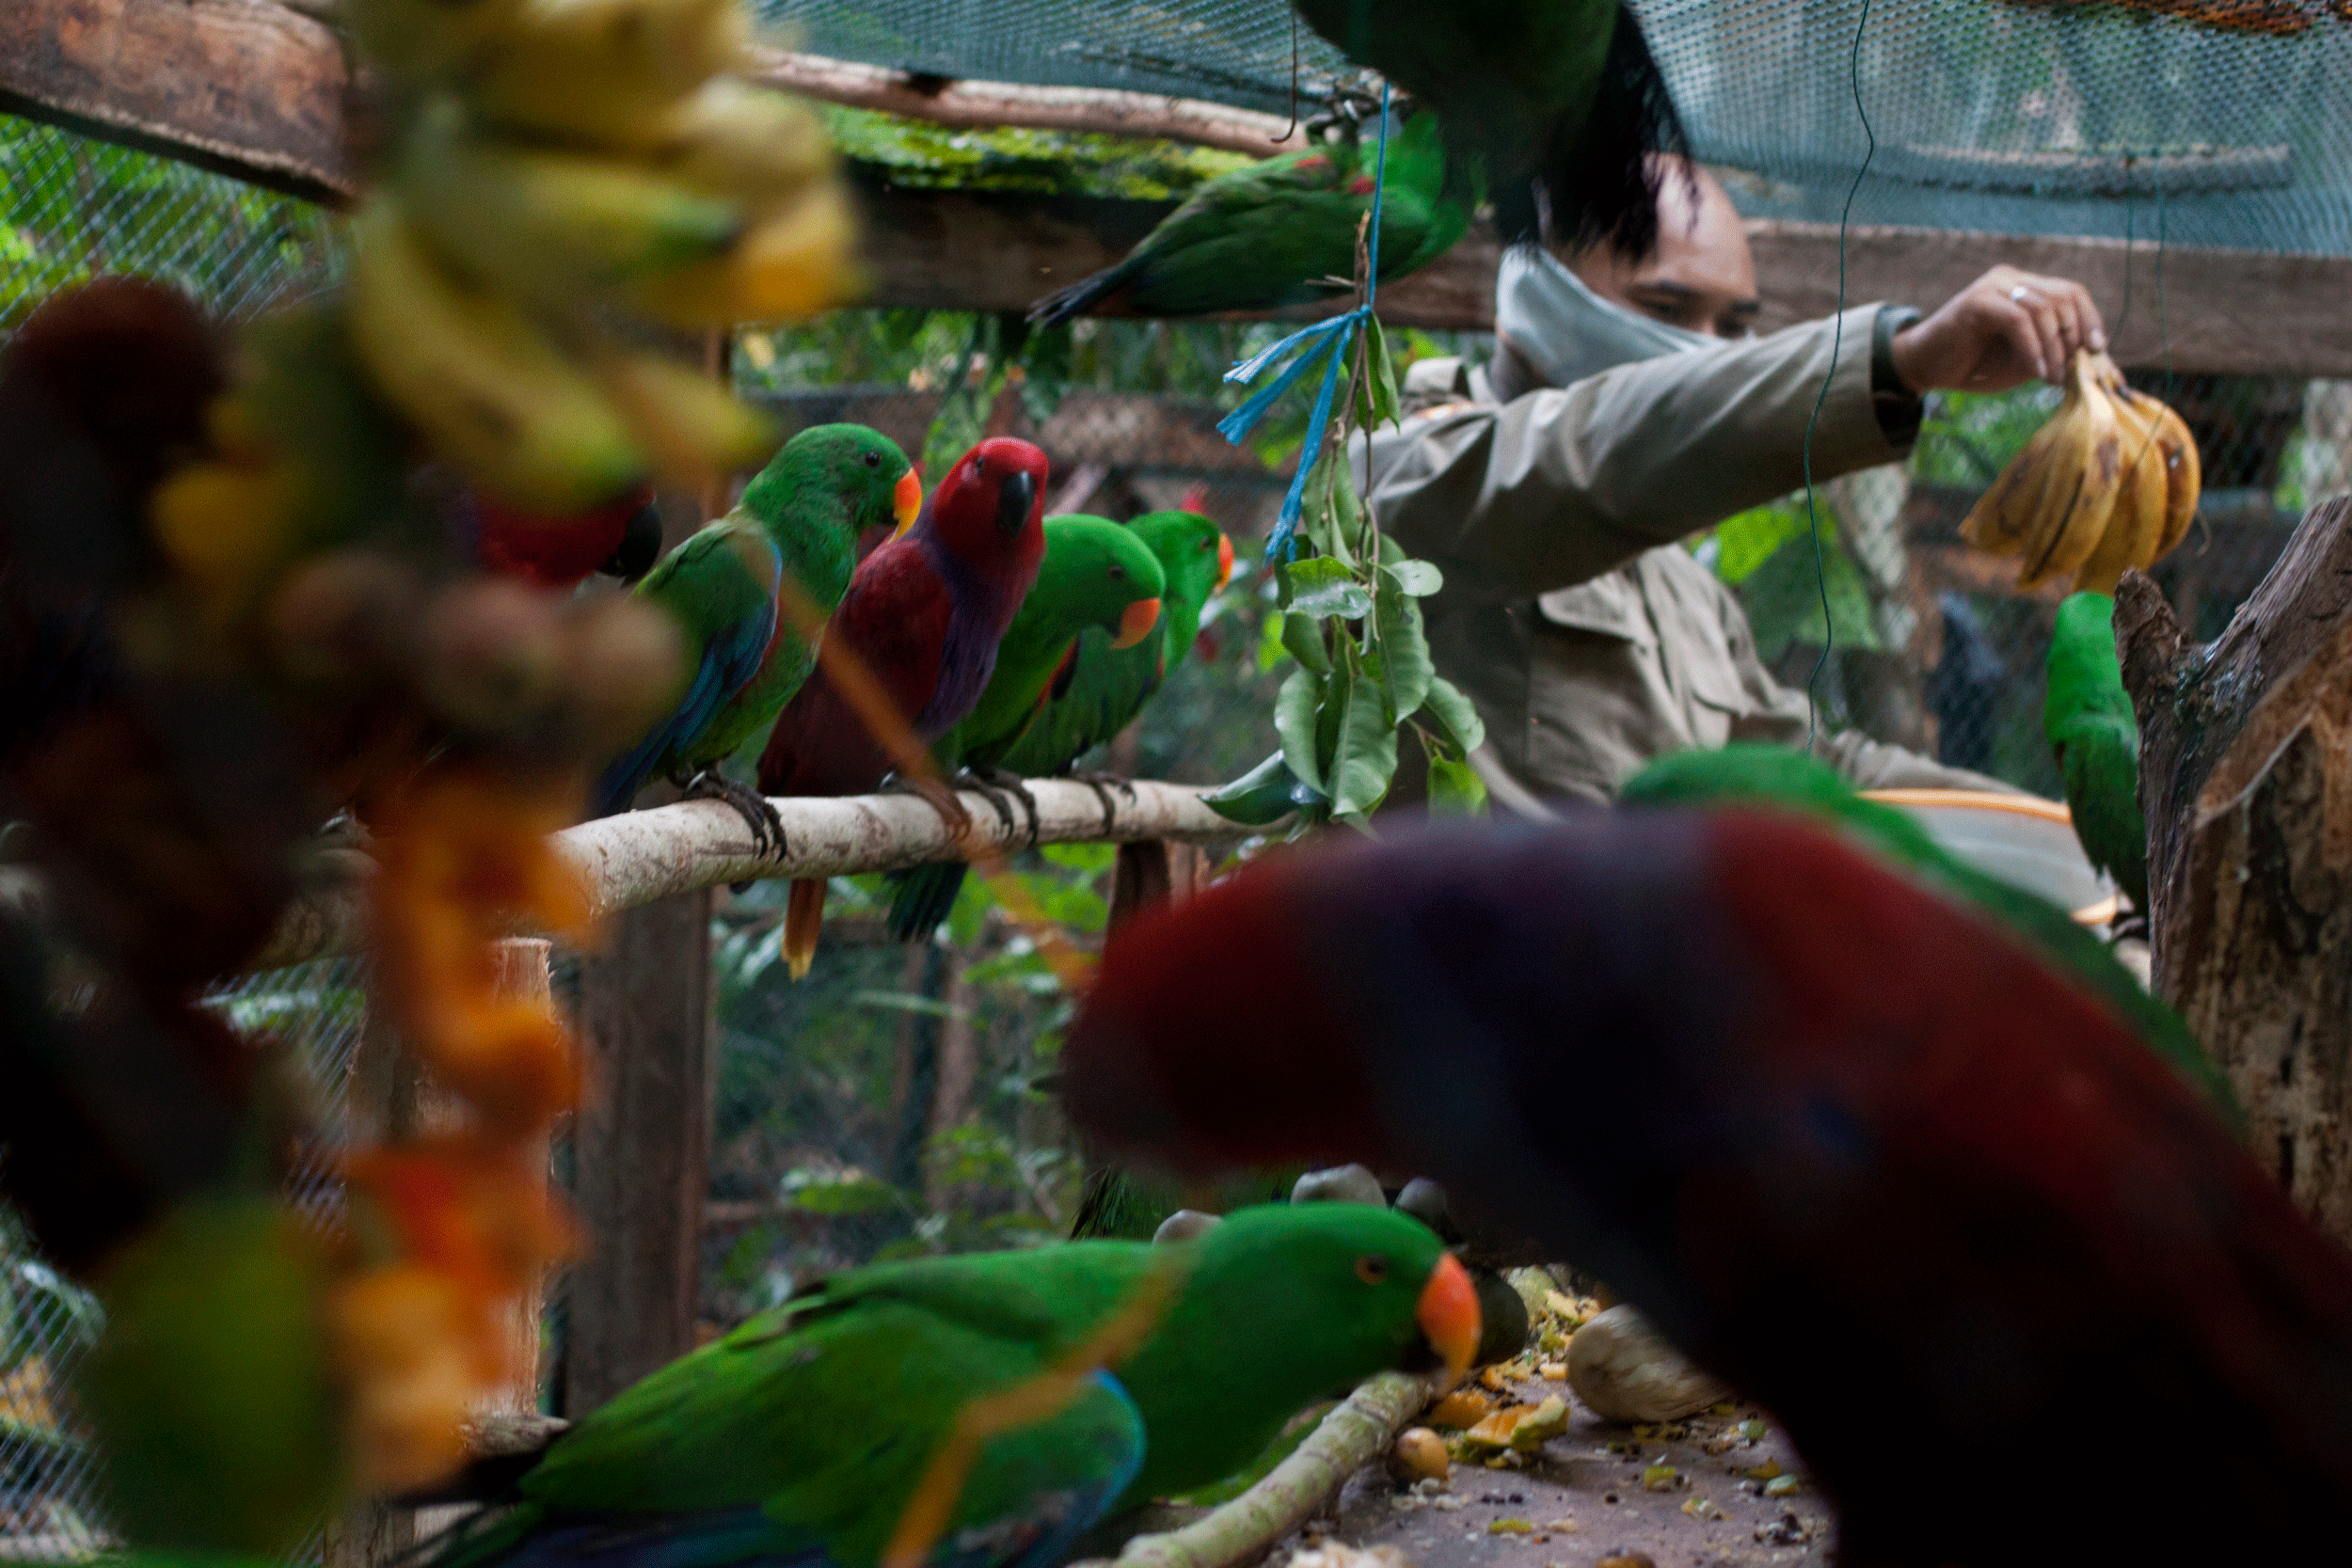 Team adding food and enrichment for Eclectus parrots